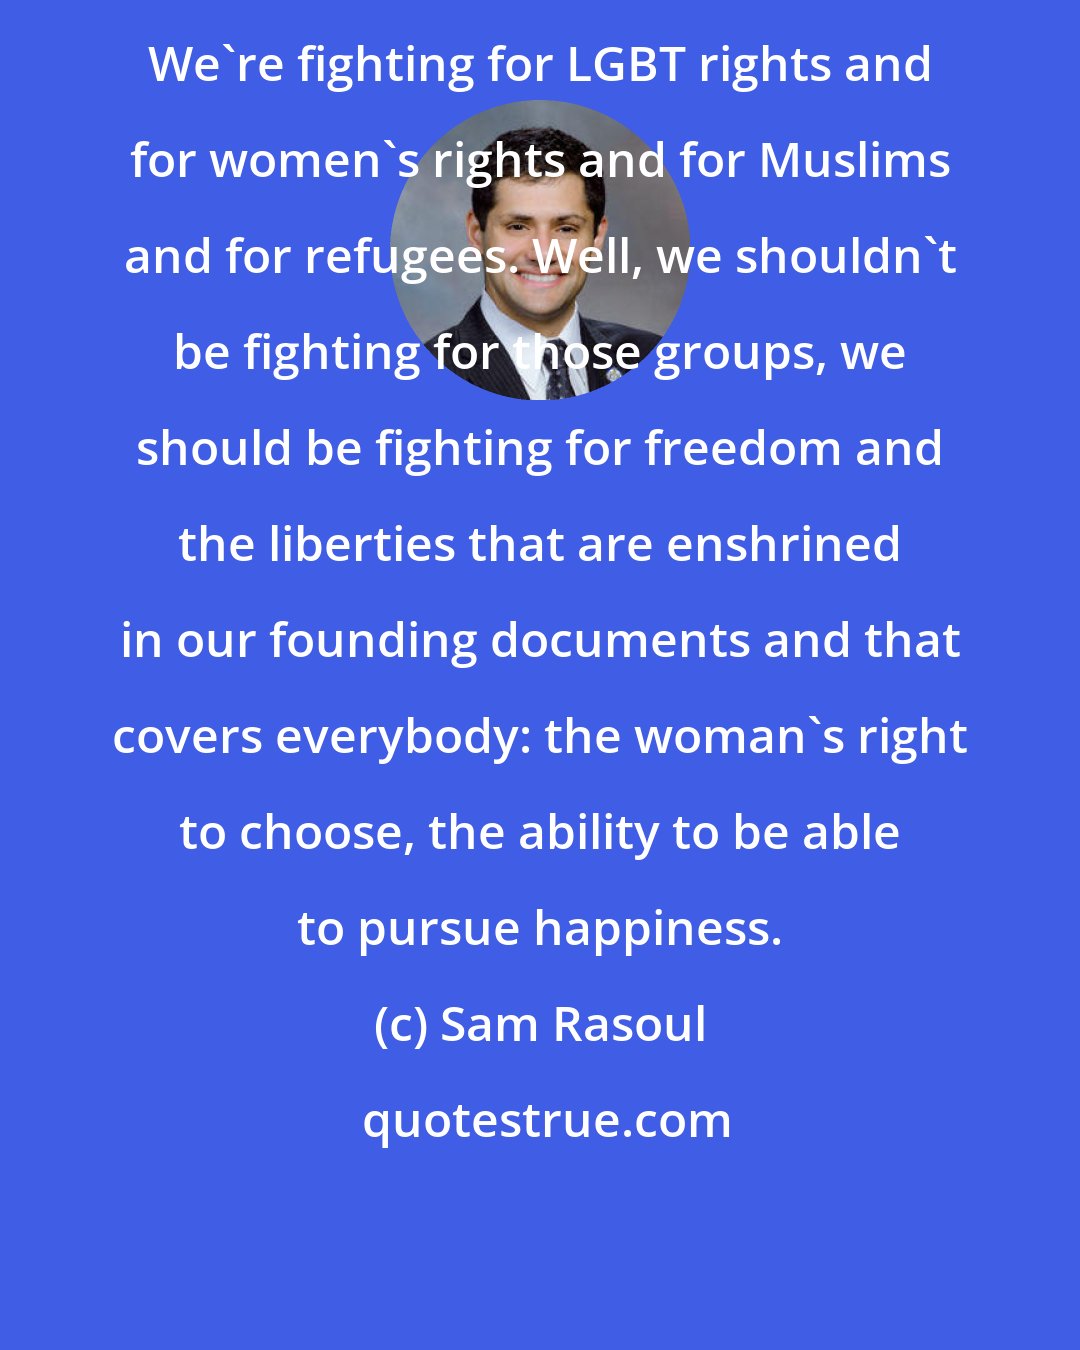 Sam Rasoul: We're fighting for LGBT rights and for women's rights and for Muslims and for refugees. Well, we shouldn't be fighting for those groups, we should be fighting for freedom and the liberties that are enshrined in our founding documents and that covers everybody: the woman's right to choose, the ability to be able to pursue happiness.